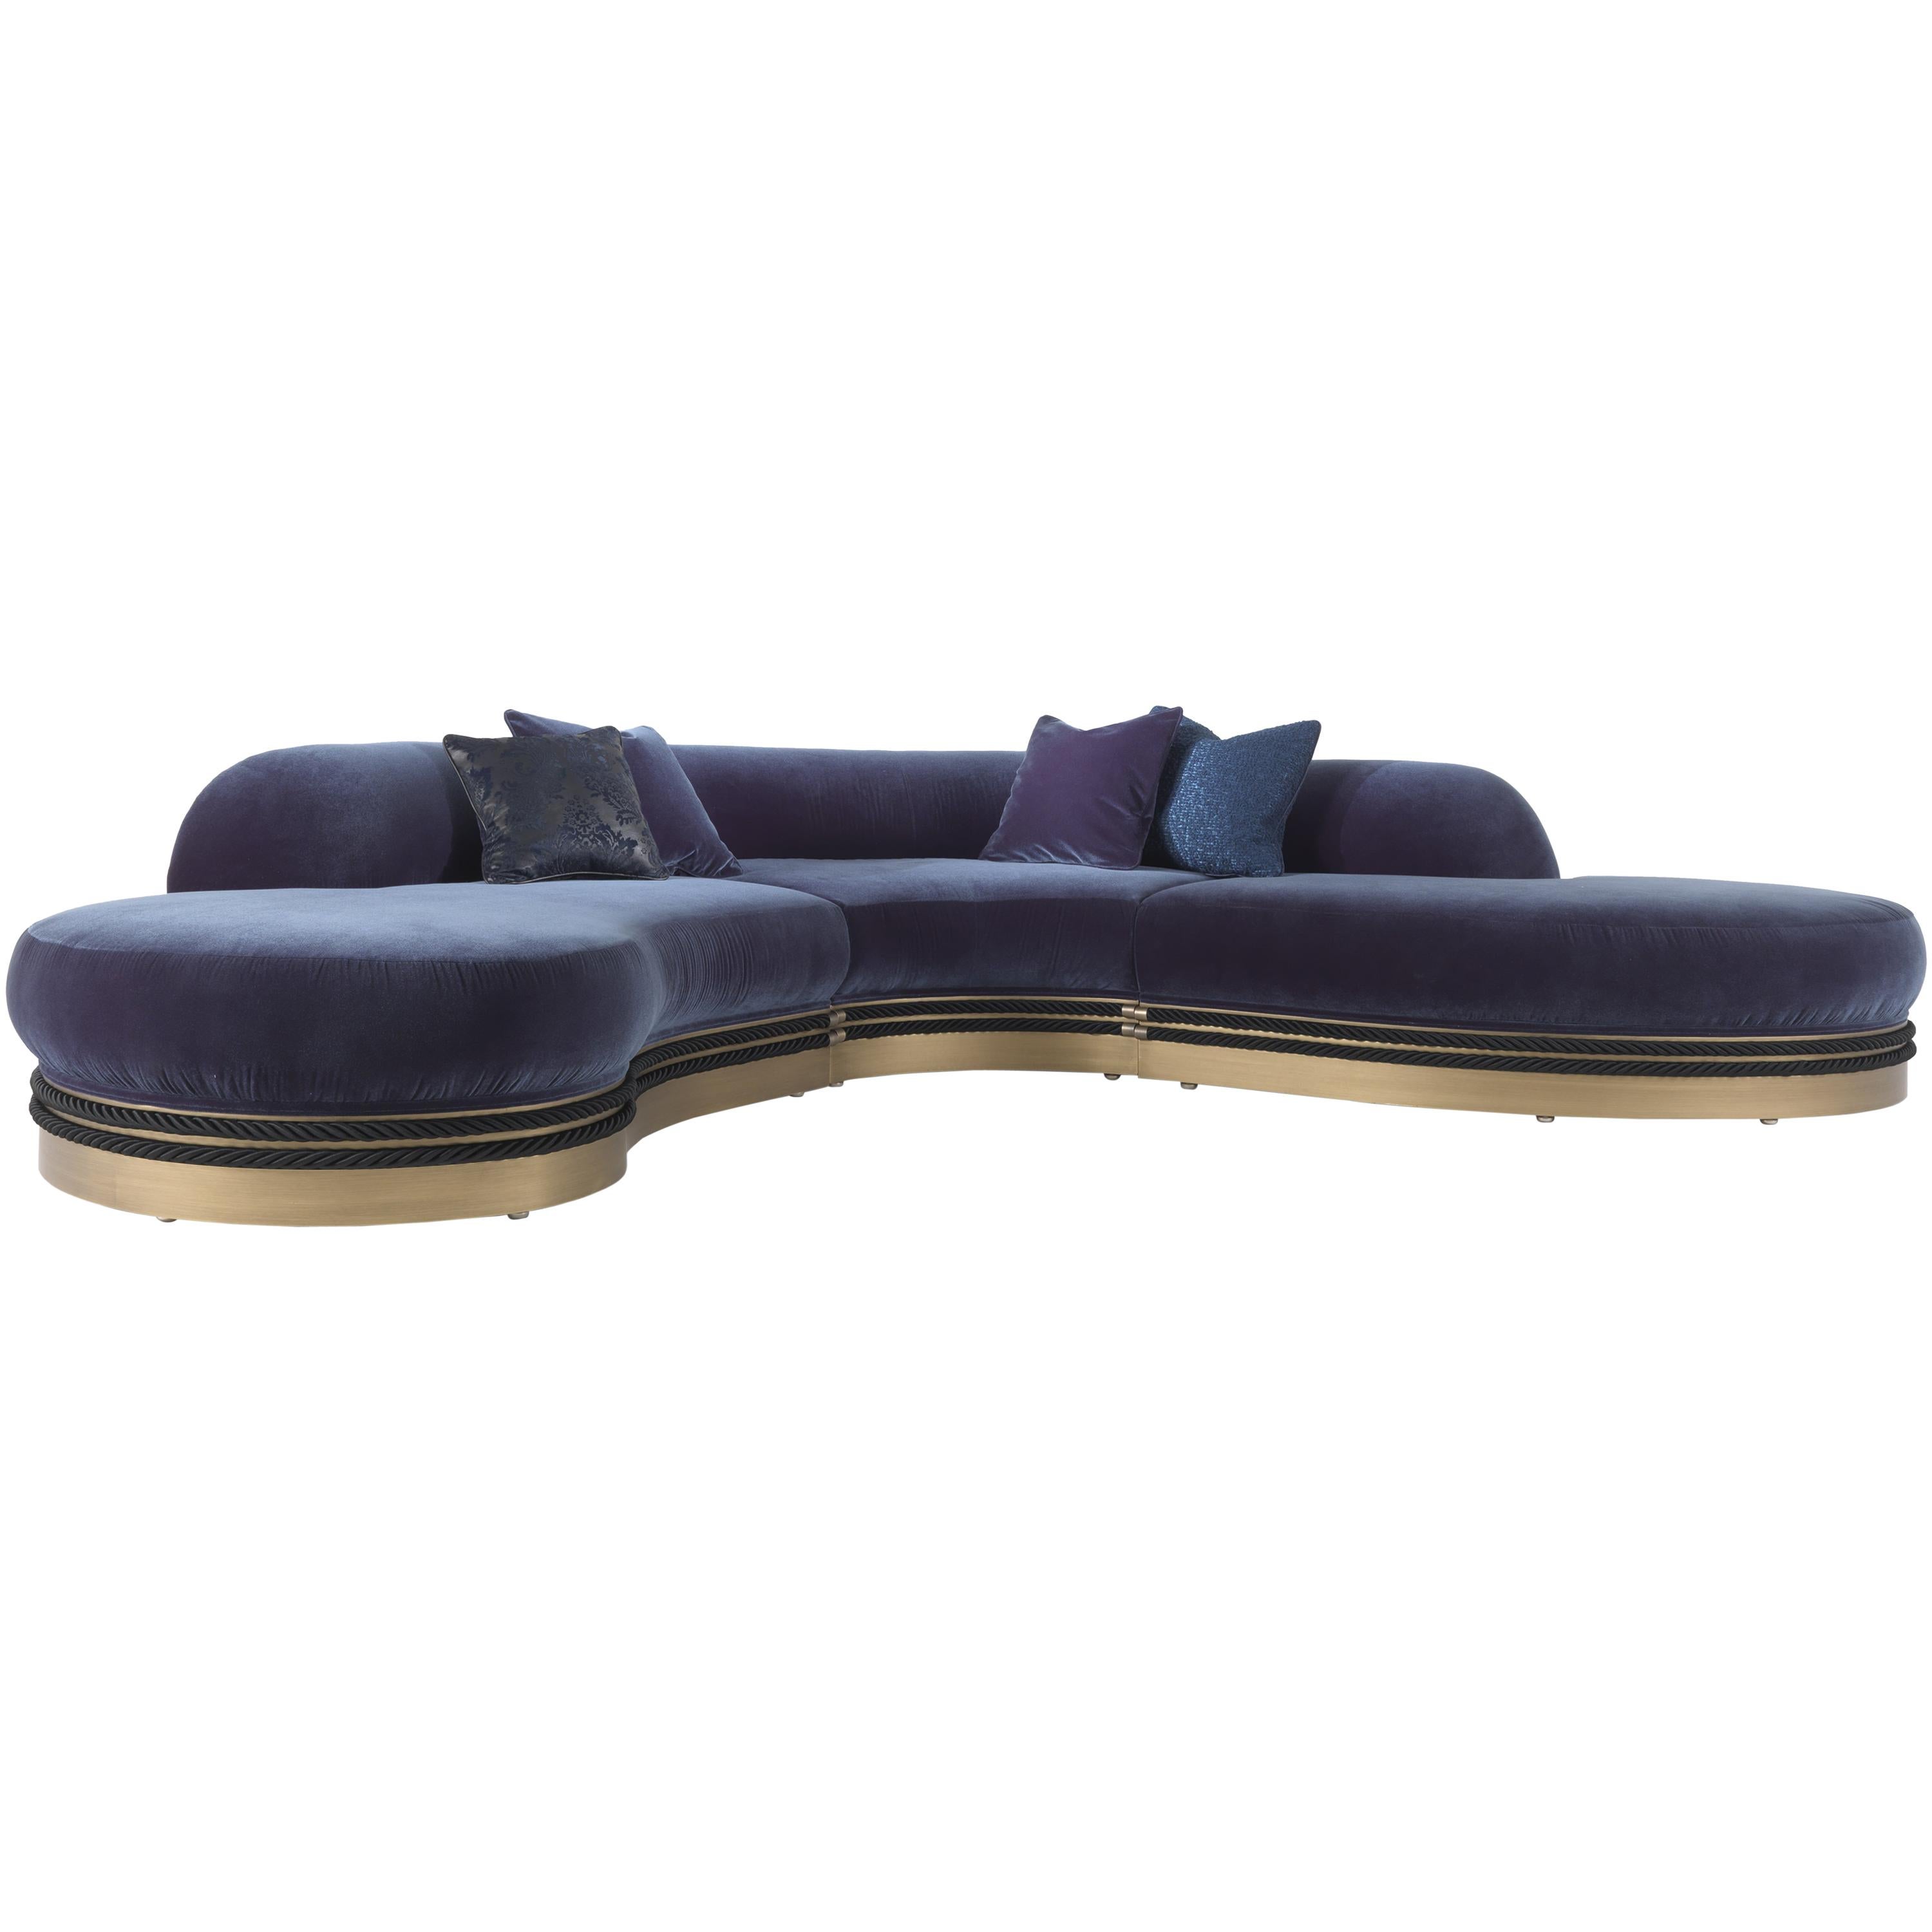 Gianfranco Ferre Alexander Sofa in Blue Fabric For Sale